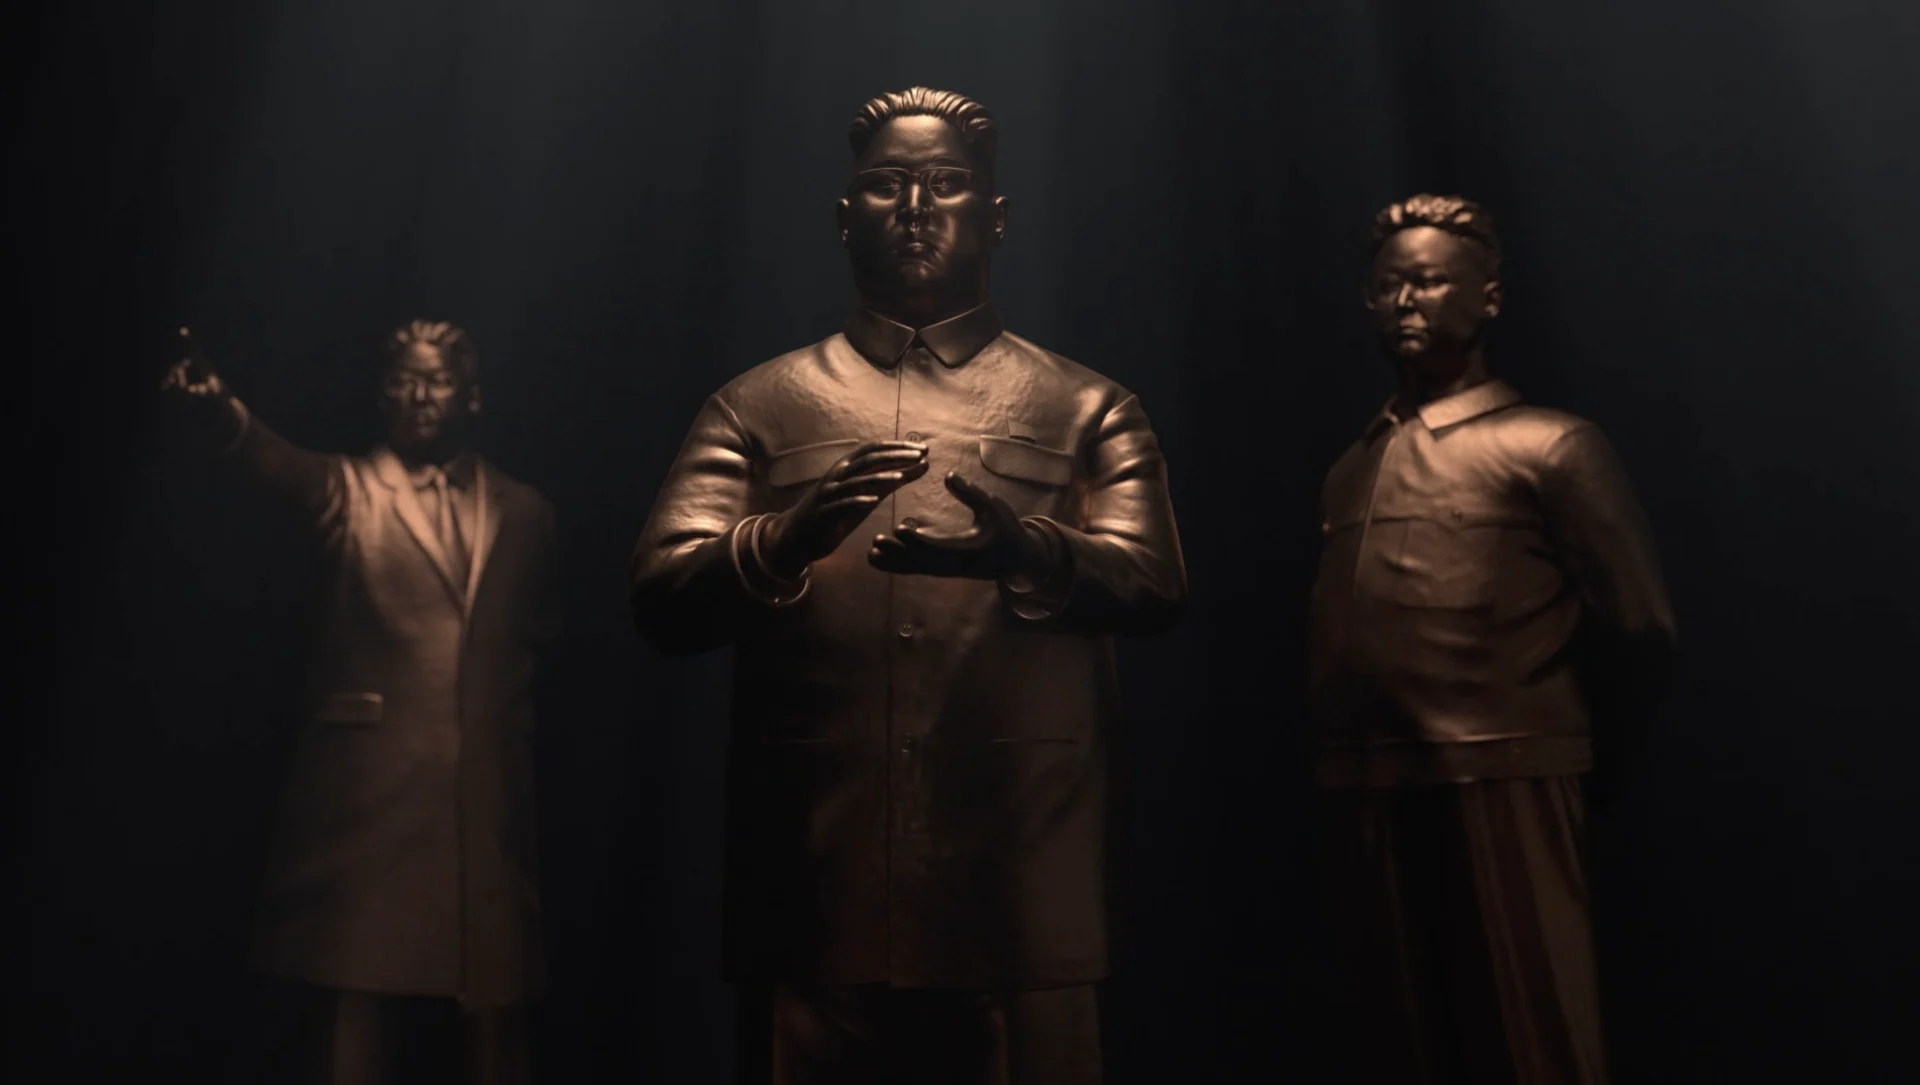 In a series that profiles the lives and lineage of the Kim family, we collaborated with National Geographic to create a promo that would symbolize the power and influence of the North Korean dynasty for the last three generations.